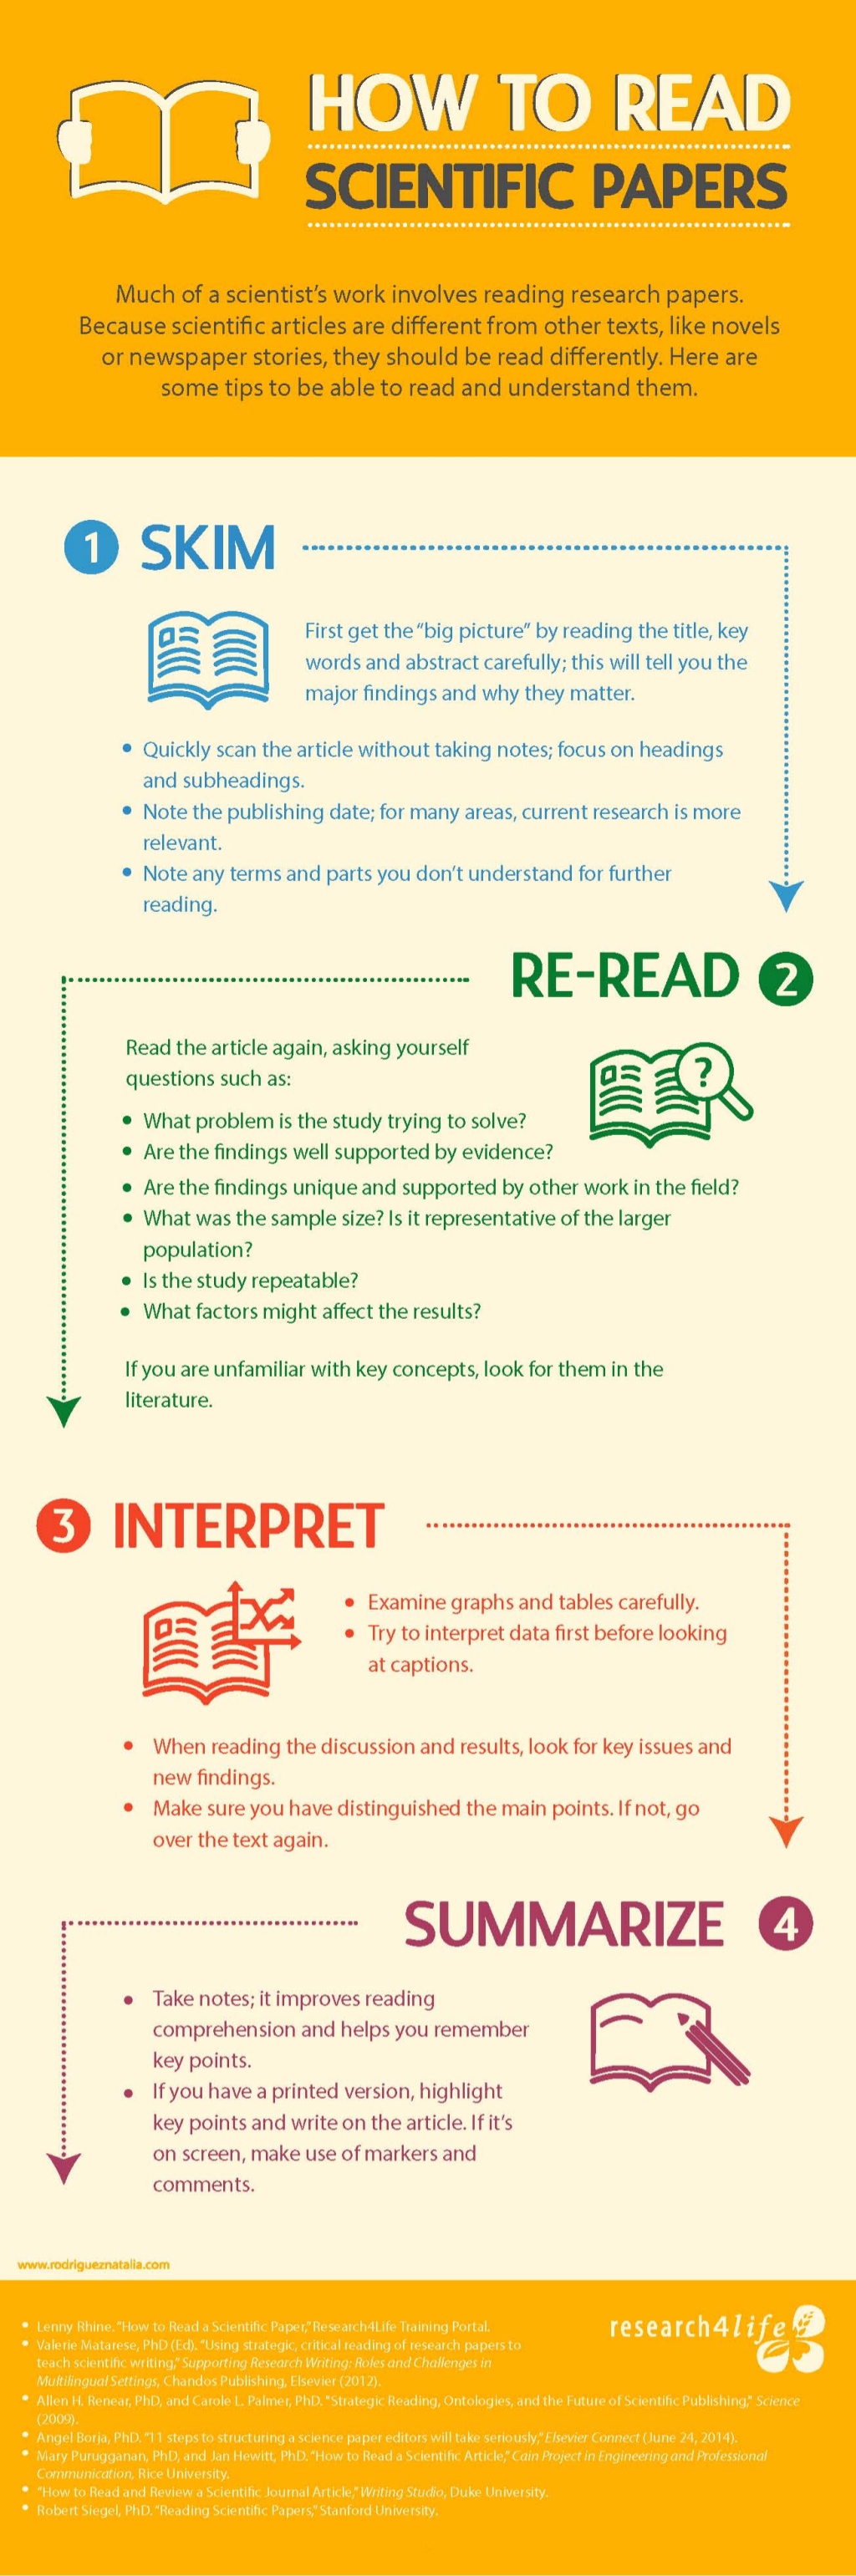 infographic-how-to-read-scientific-papers-1-1024